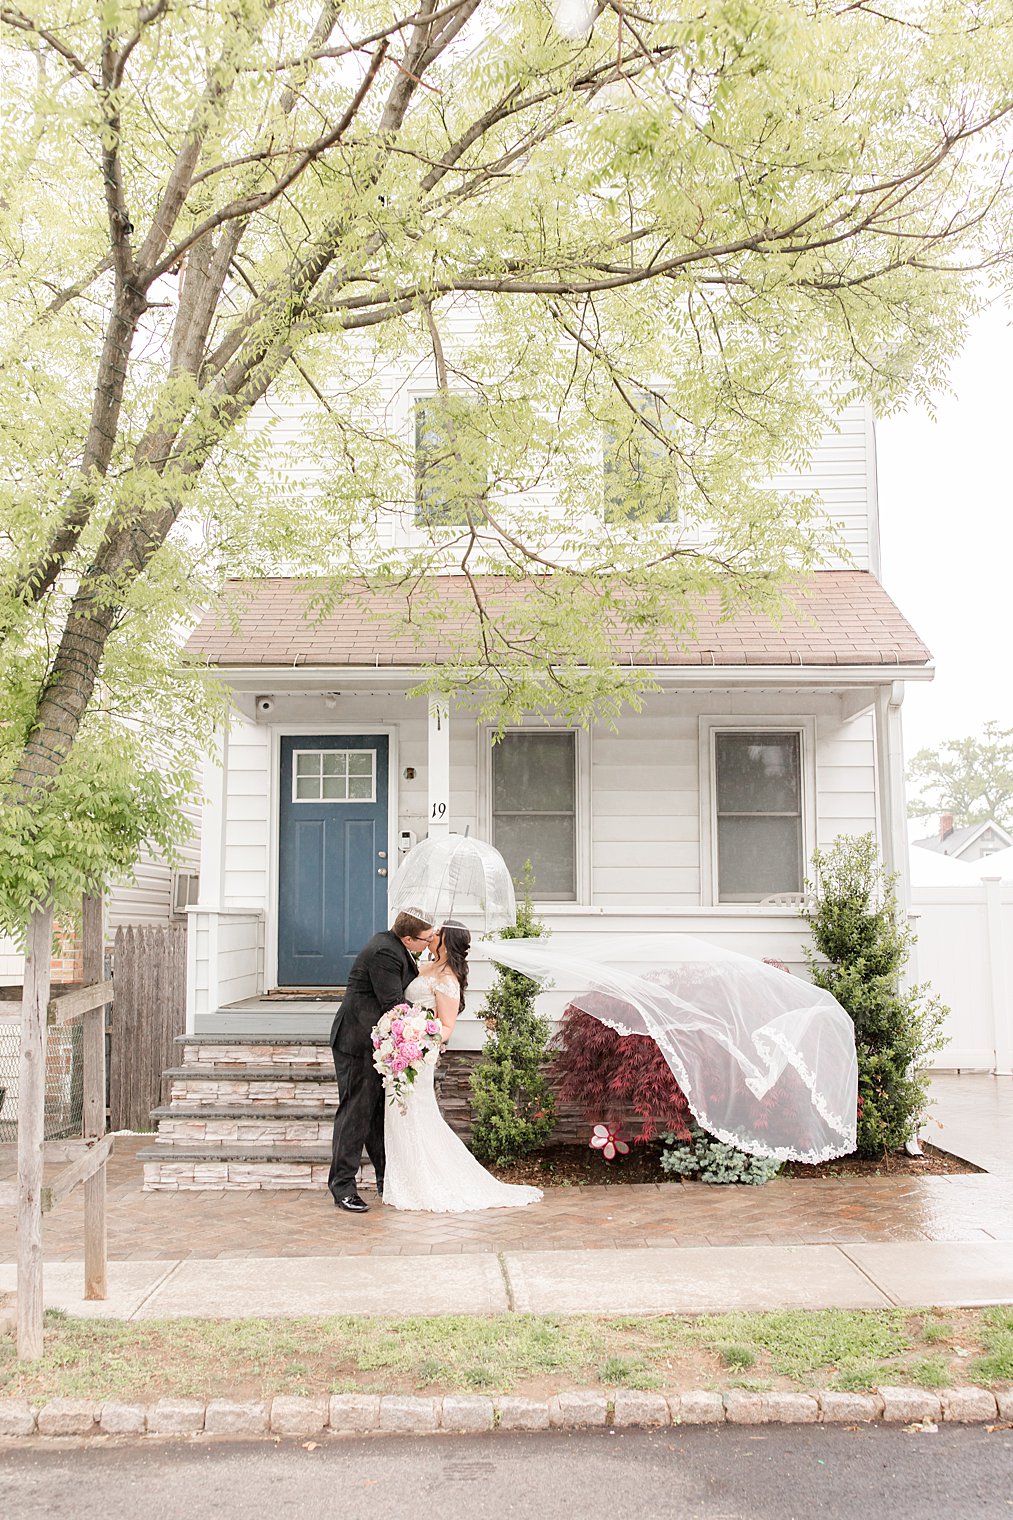 bride and groom pose under umbrella during rainy wedding day at home in Staten Island NY 